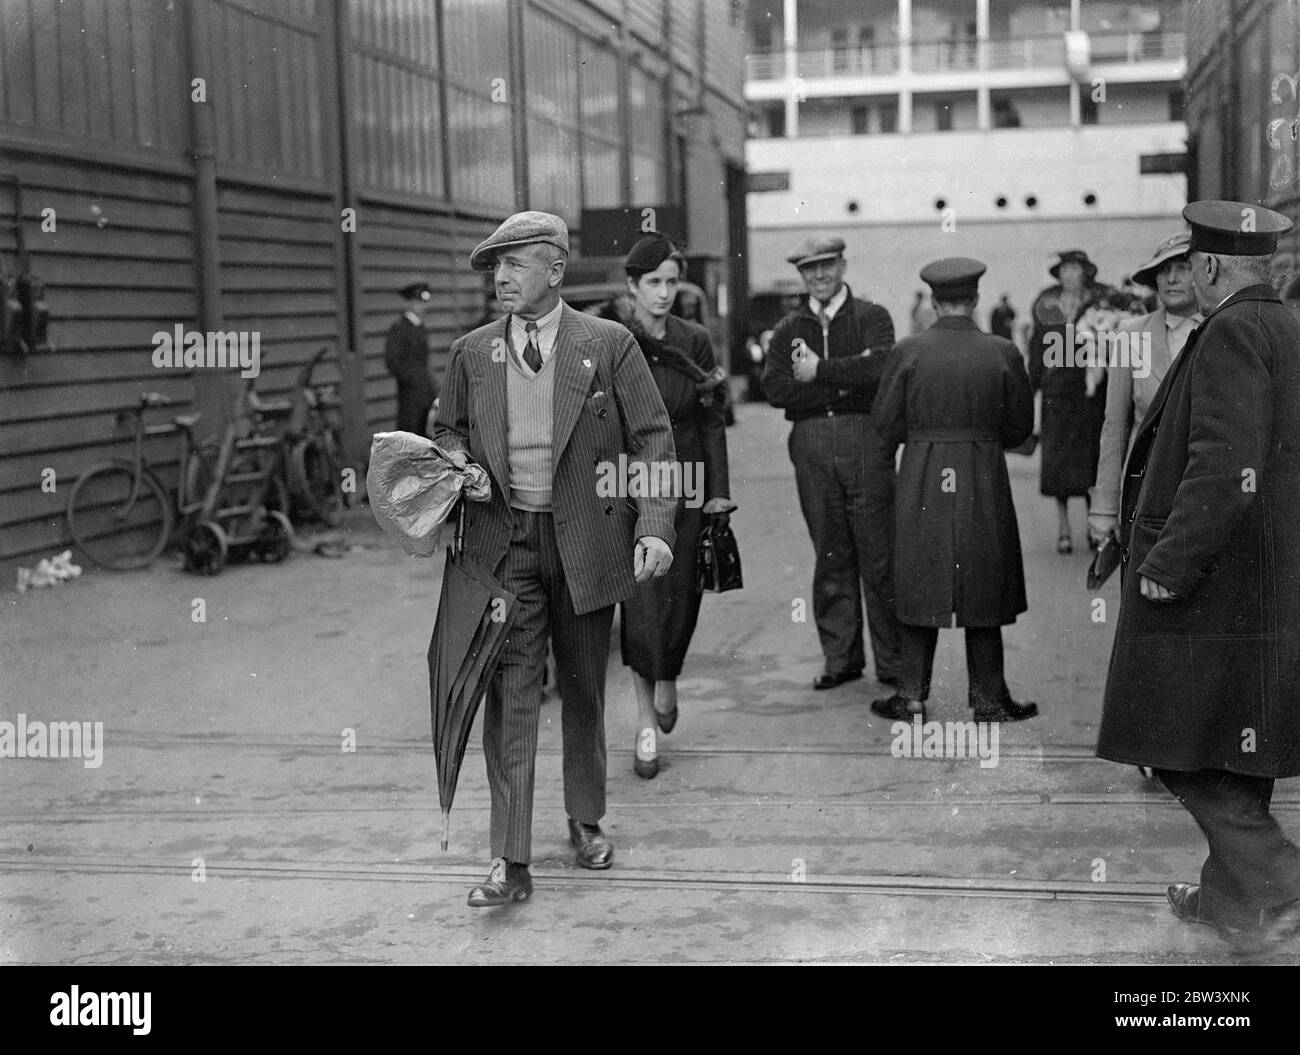 Earl Howe arrives home from South Africa with his wife . Earl Howe , the racing motorist , who was married in South Africa recently arrived at Southampton aboard the liner Athlone Castle with his wife from Cape Town . Earl Howe has been motor racing in South Africa . Photo shows , Earl Howe going ashore at Southampton followed by his wife . 19 March 1937 Stock Photo